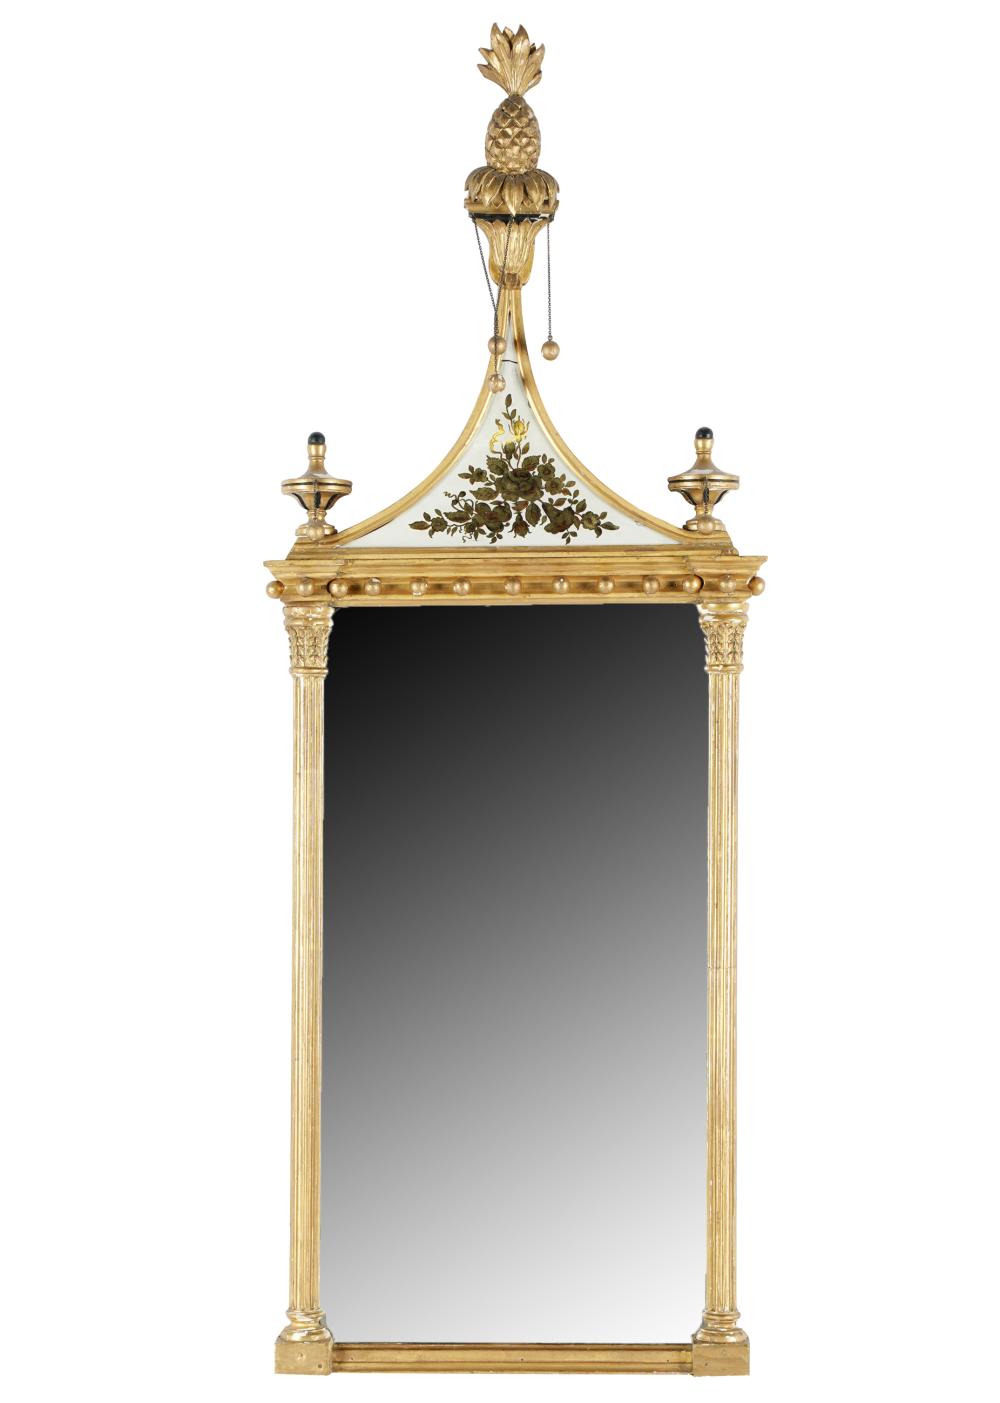 NEOCLASSICAL STYLE GILT WALL MIRRORthe 32d644